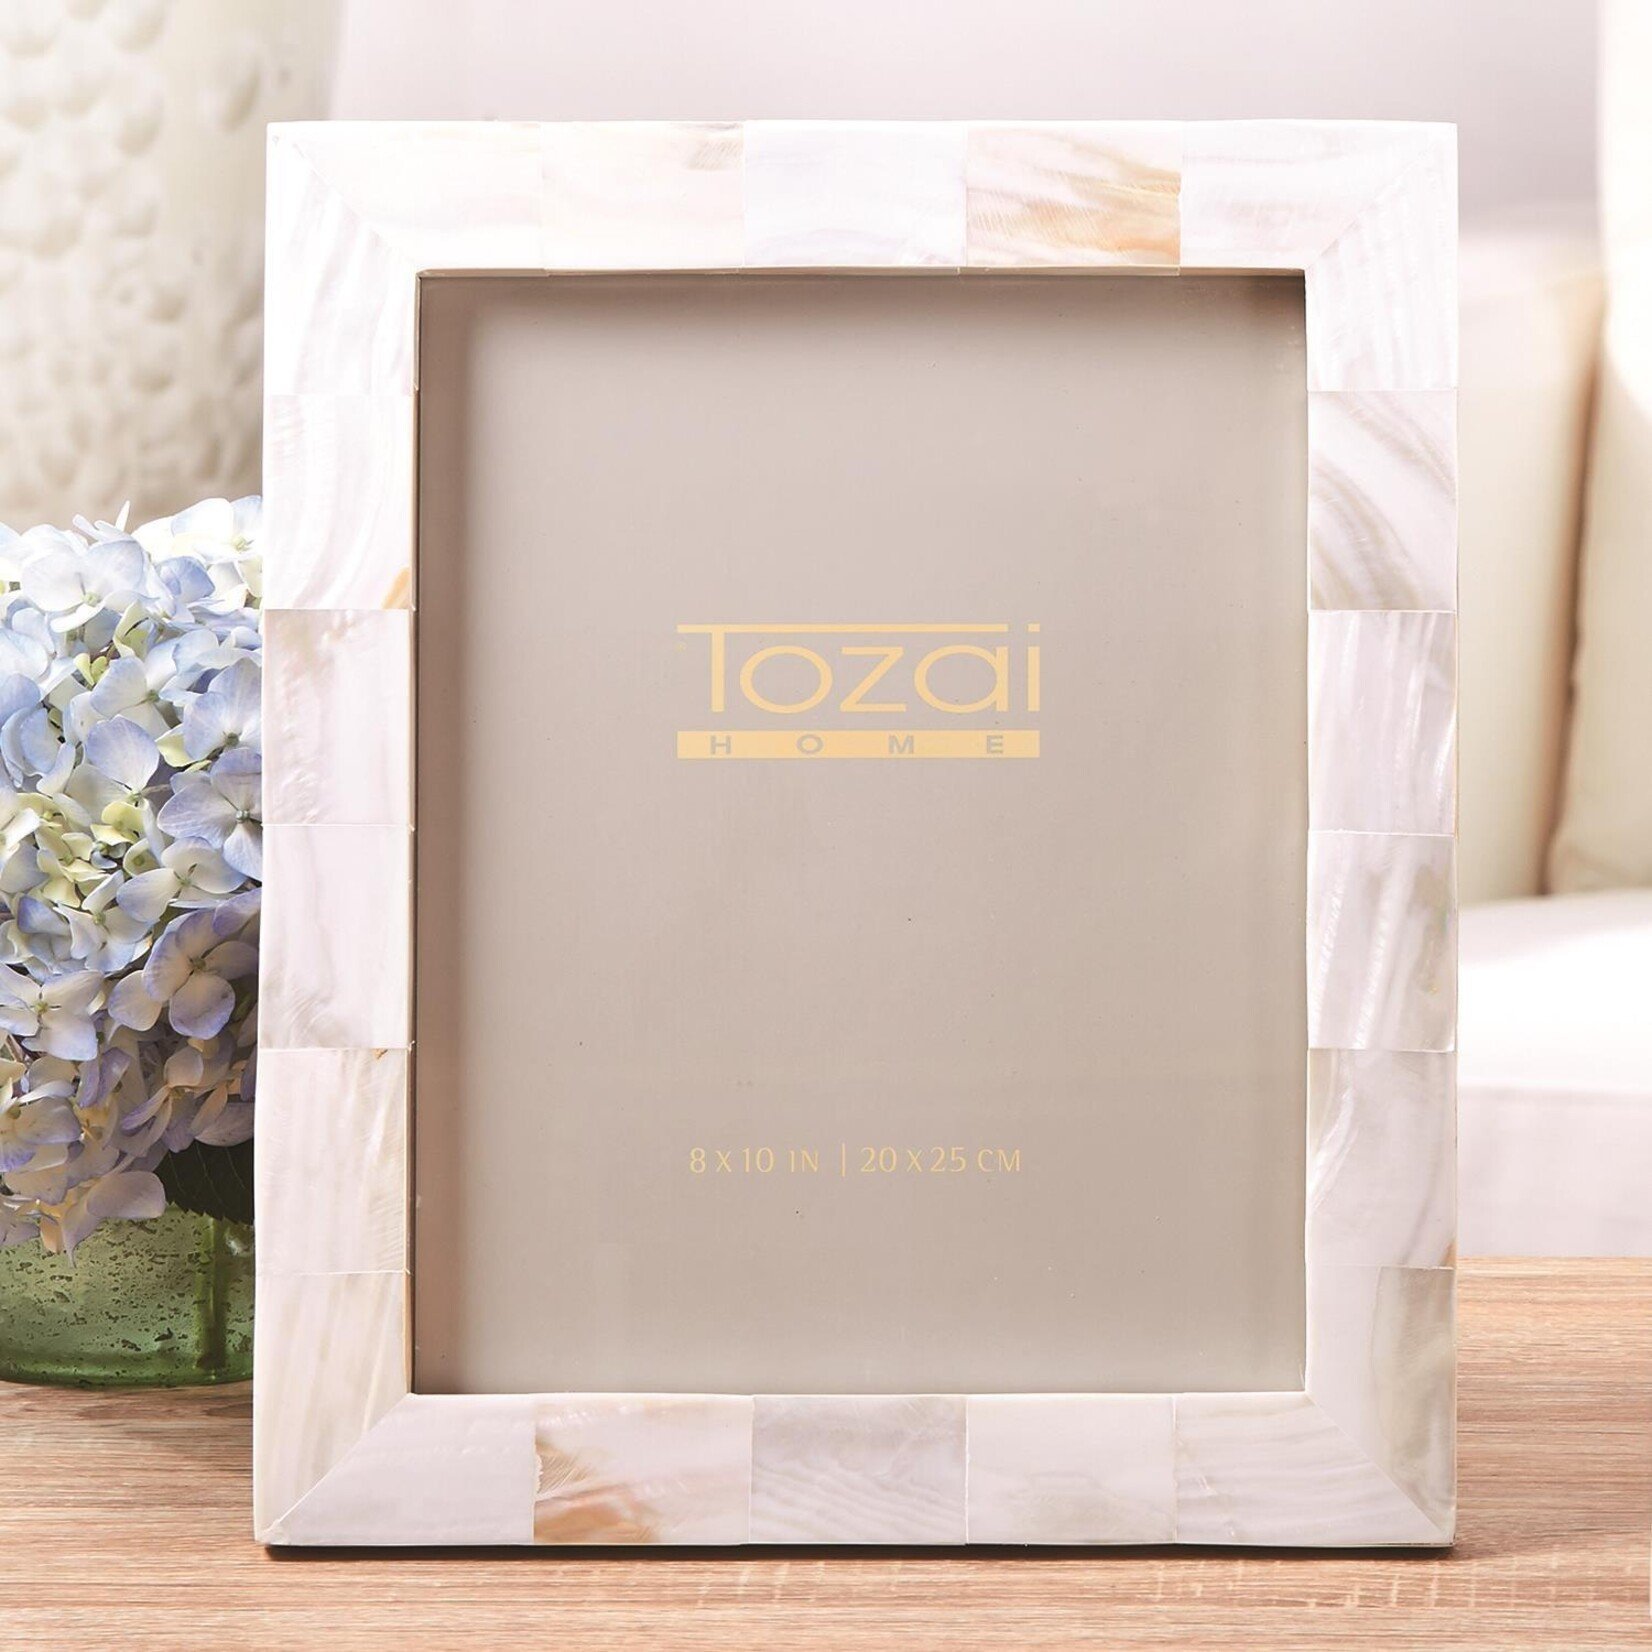 Tozai Pearly White 8" x 10" Mother of Pearl in Gift Box